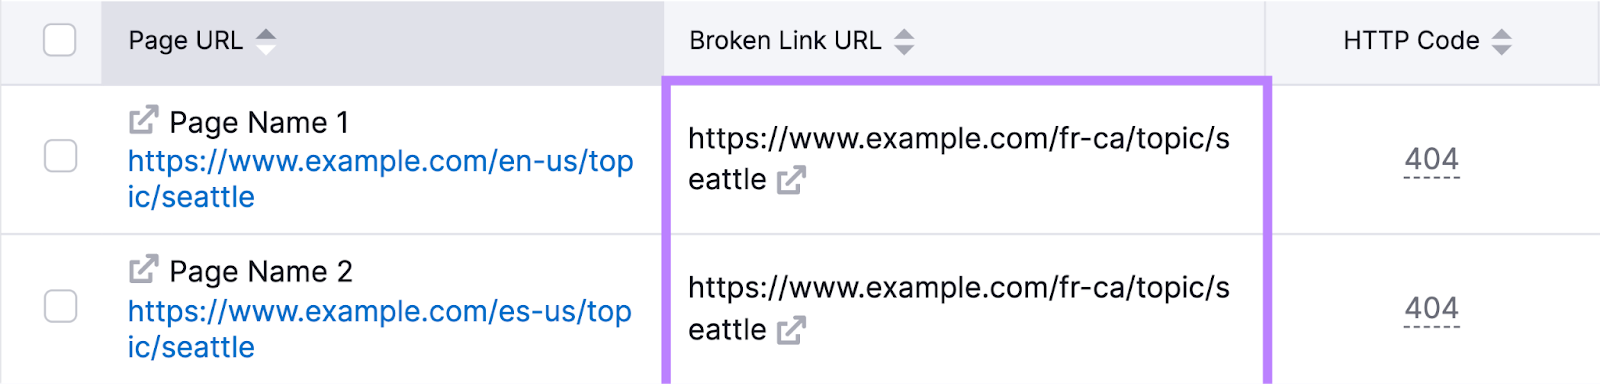 A list of pages that have included a broken URL in their content